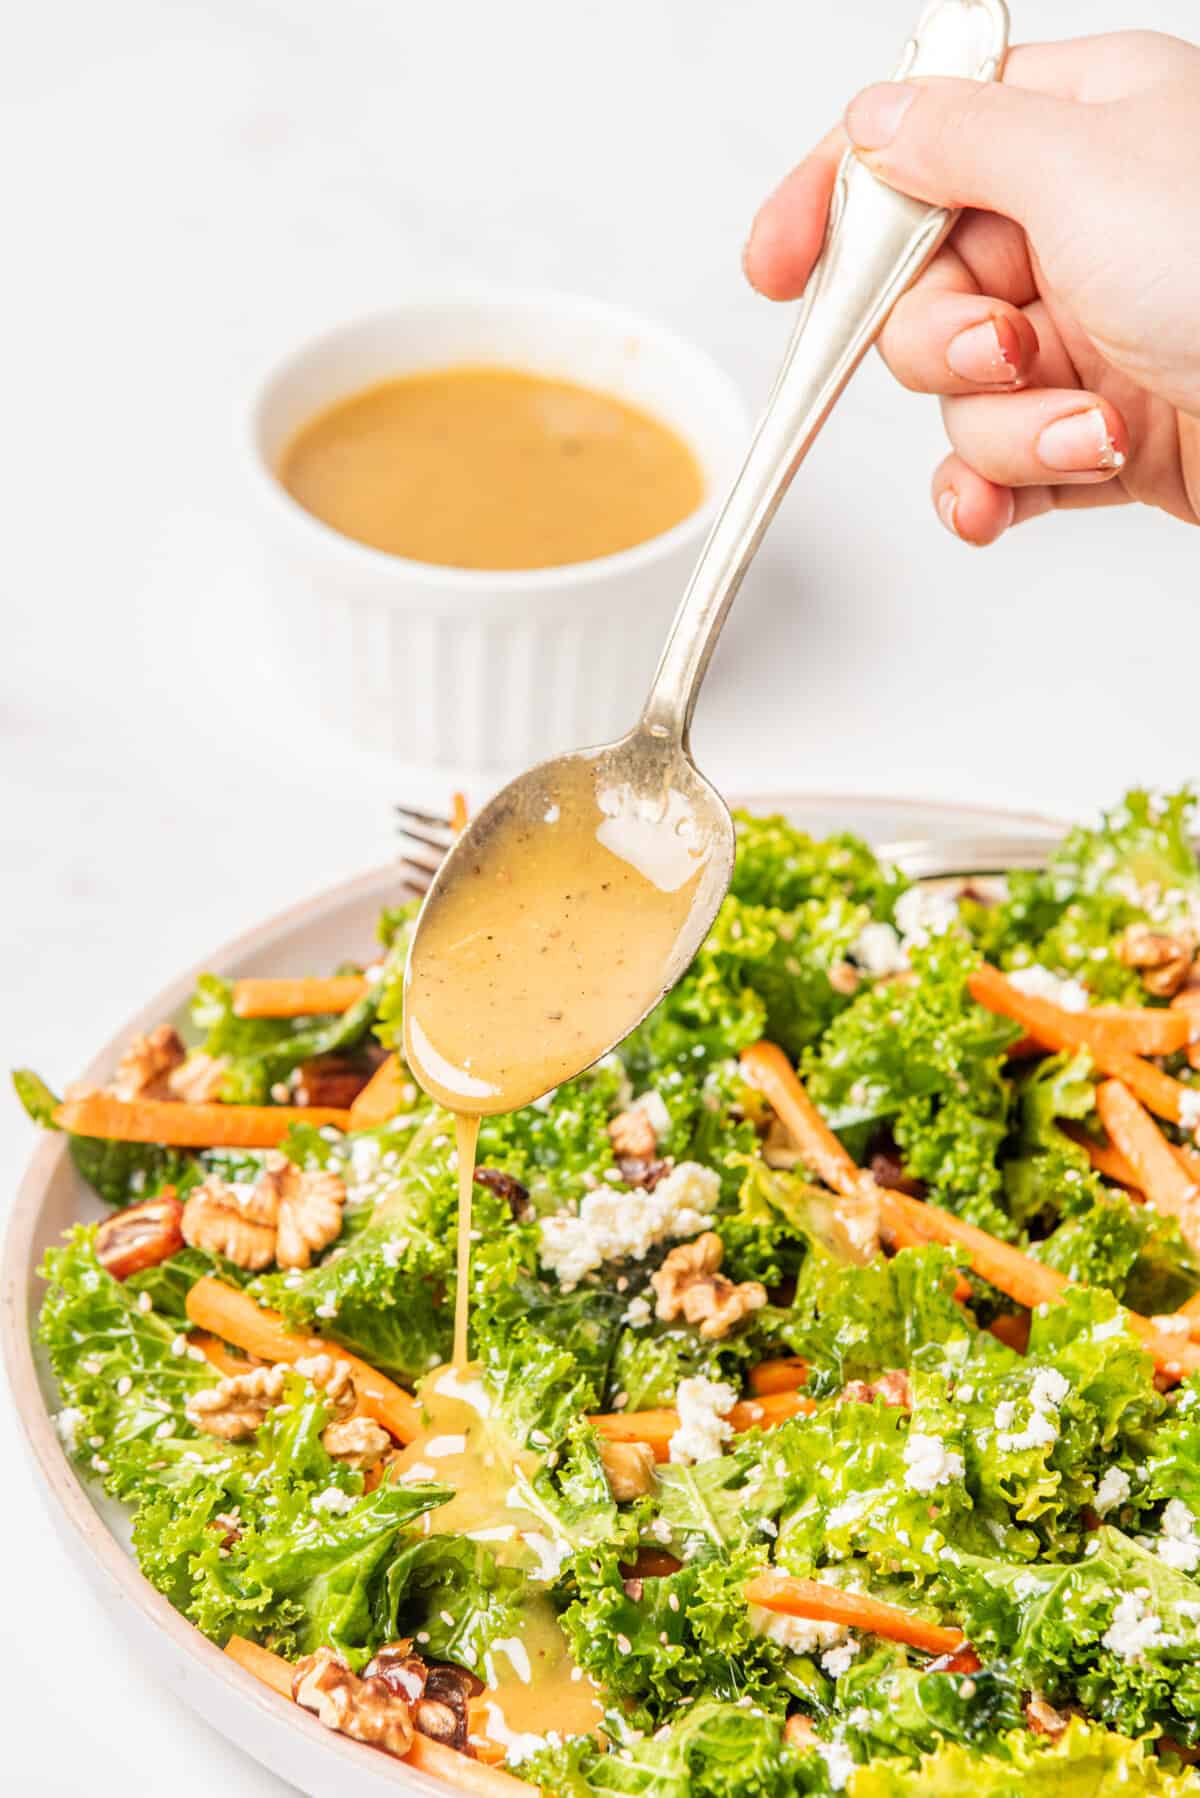 An image of fall kale salad with the dressing being drizzled over it.